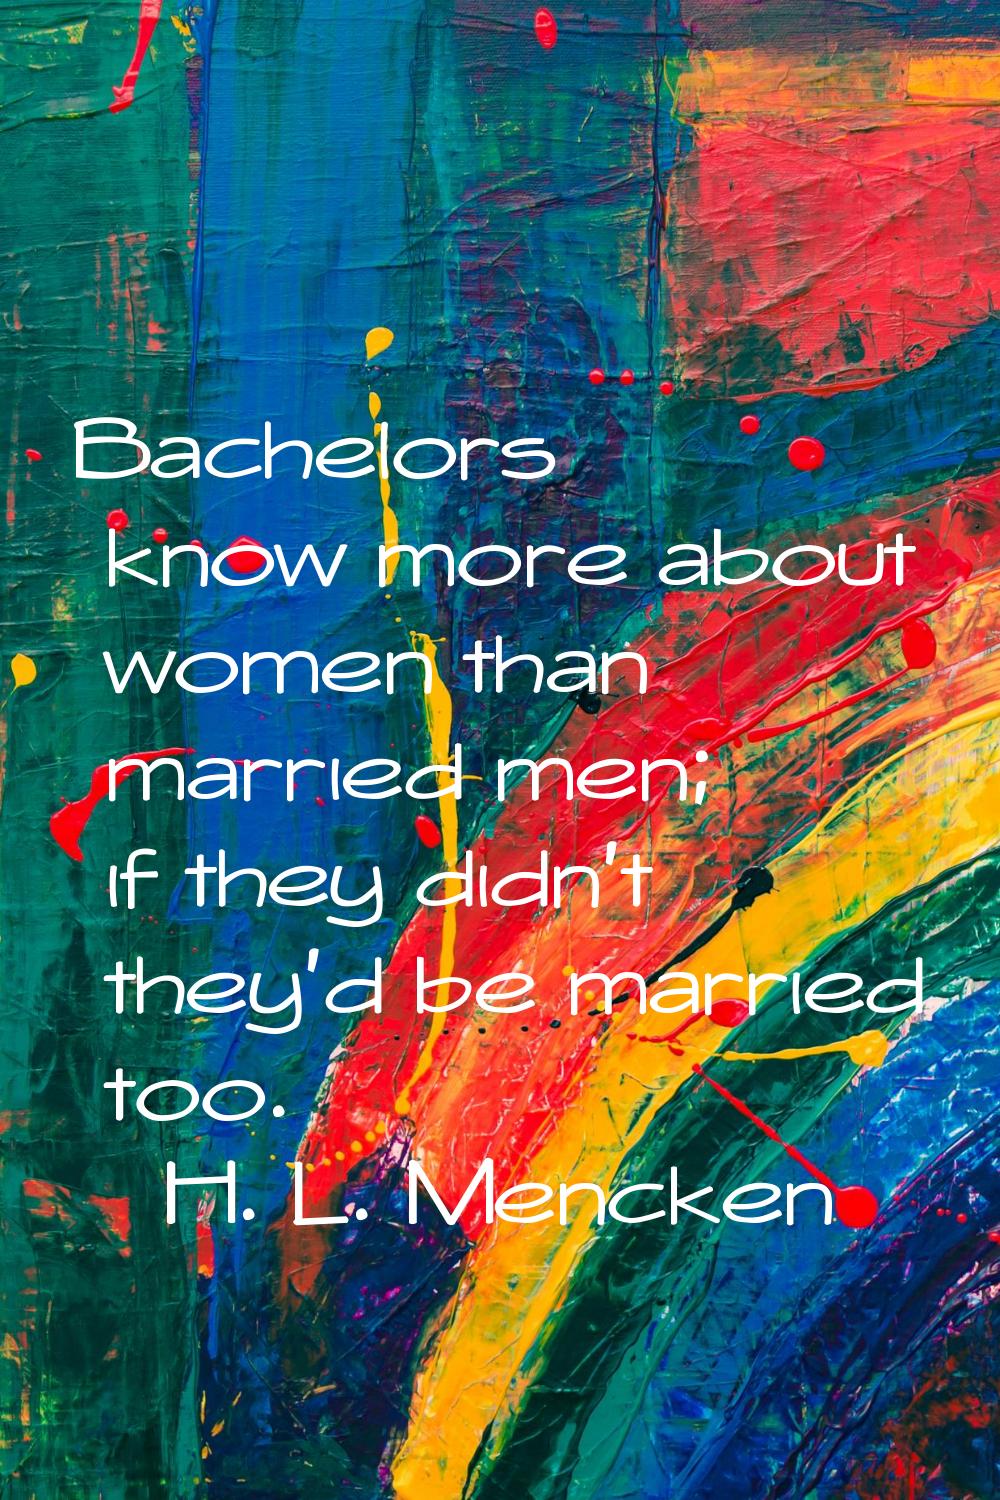 Bachelors know more about women than married men; if they didn't they'd be married too.